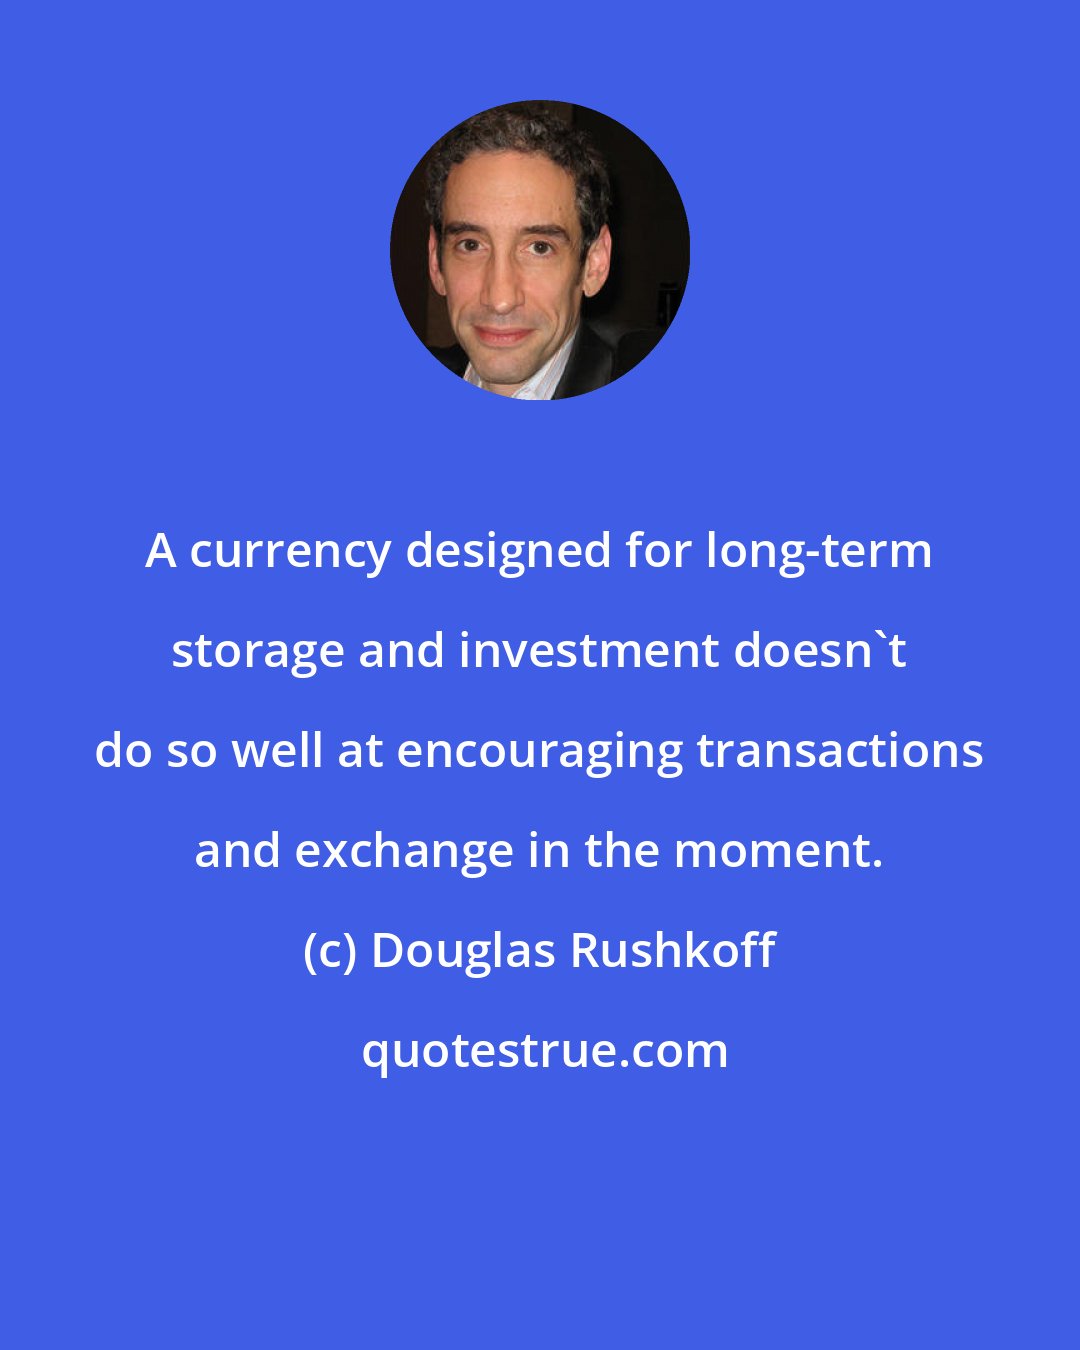 Douglas Rushkoff: A currency designed for long-term storage and investment doesn't do so well at encouraging transactions and exchange in the moment.